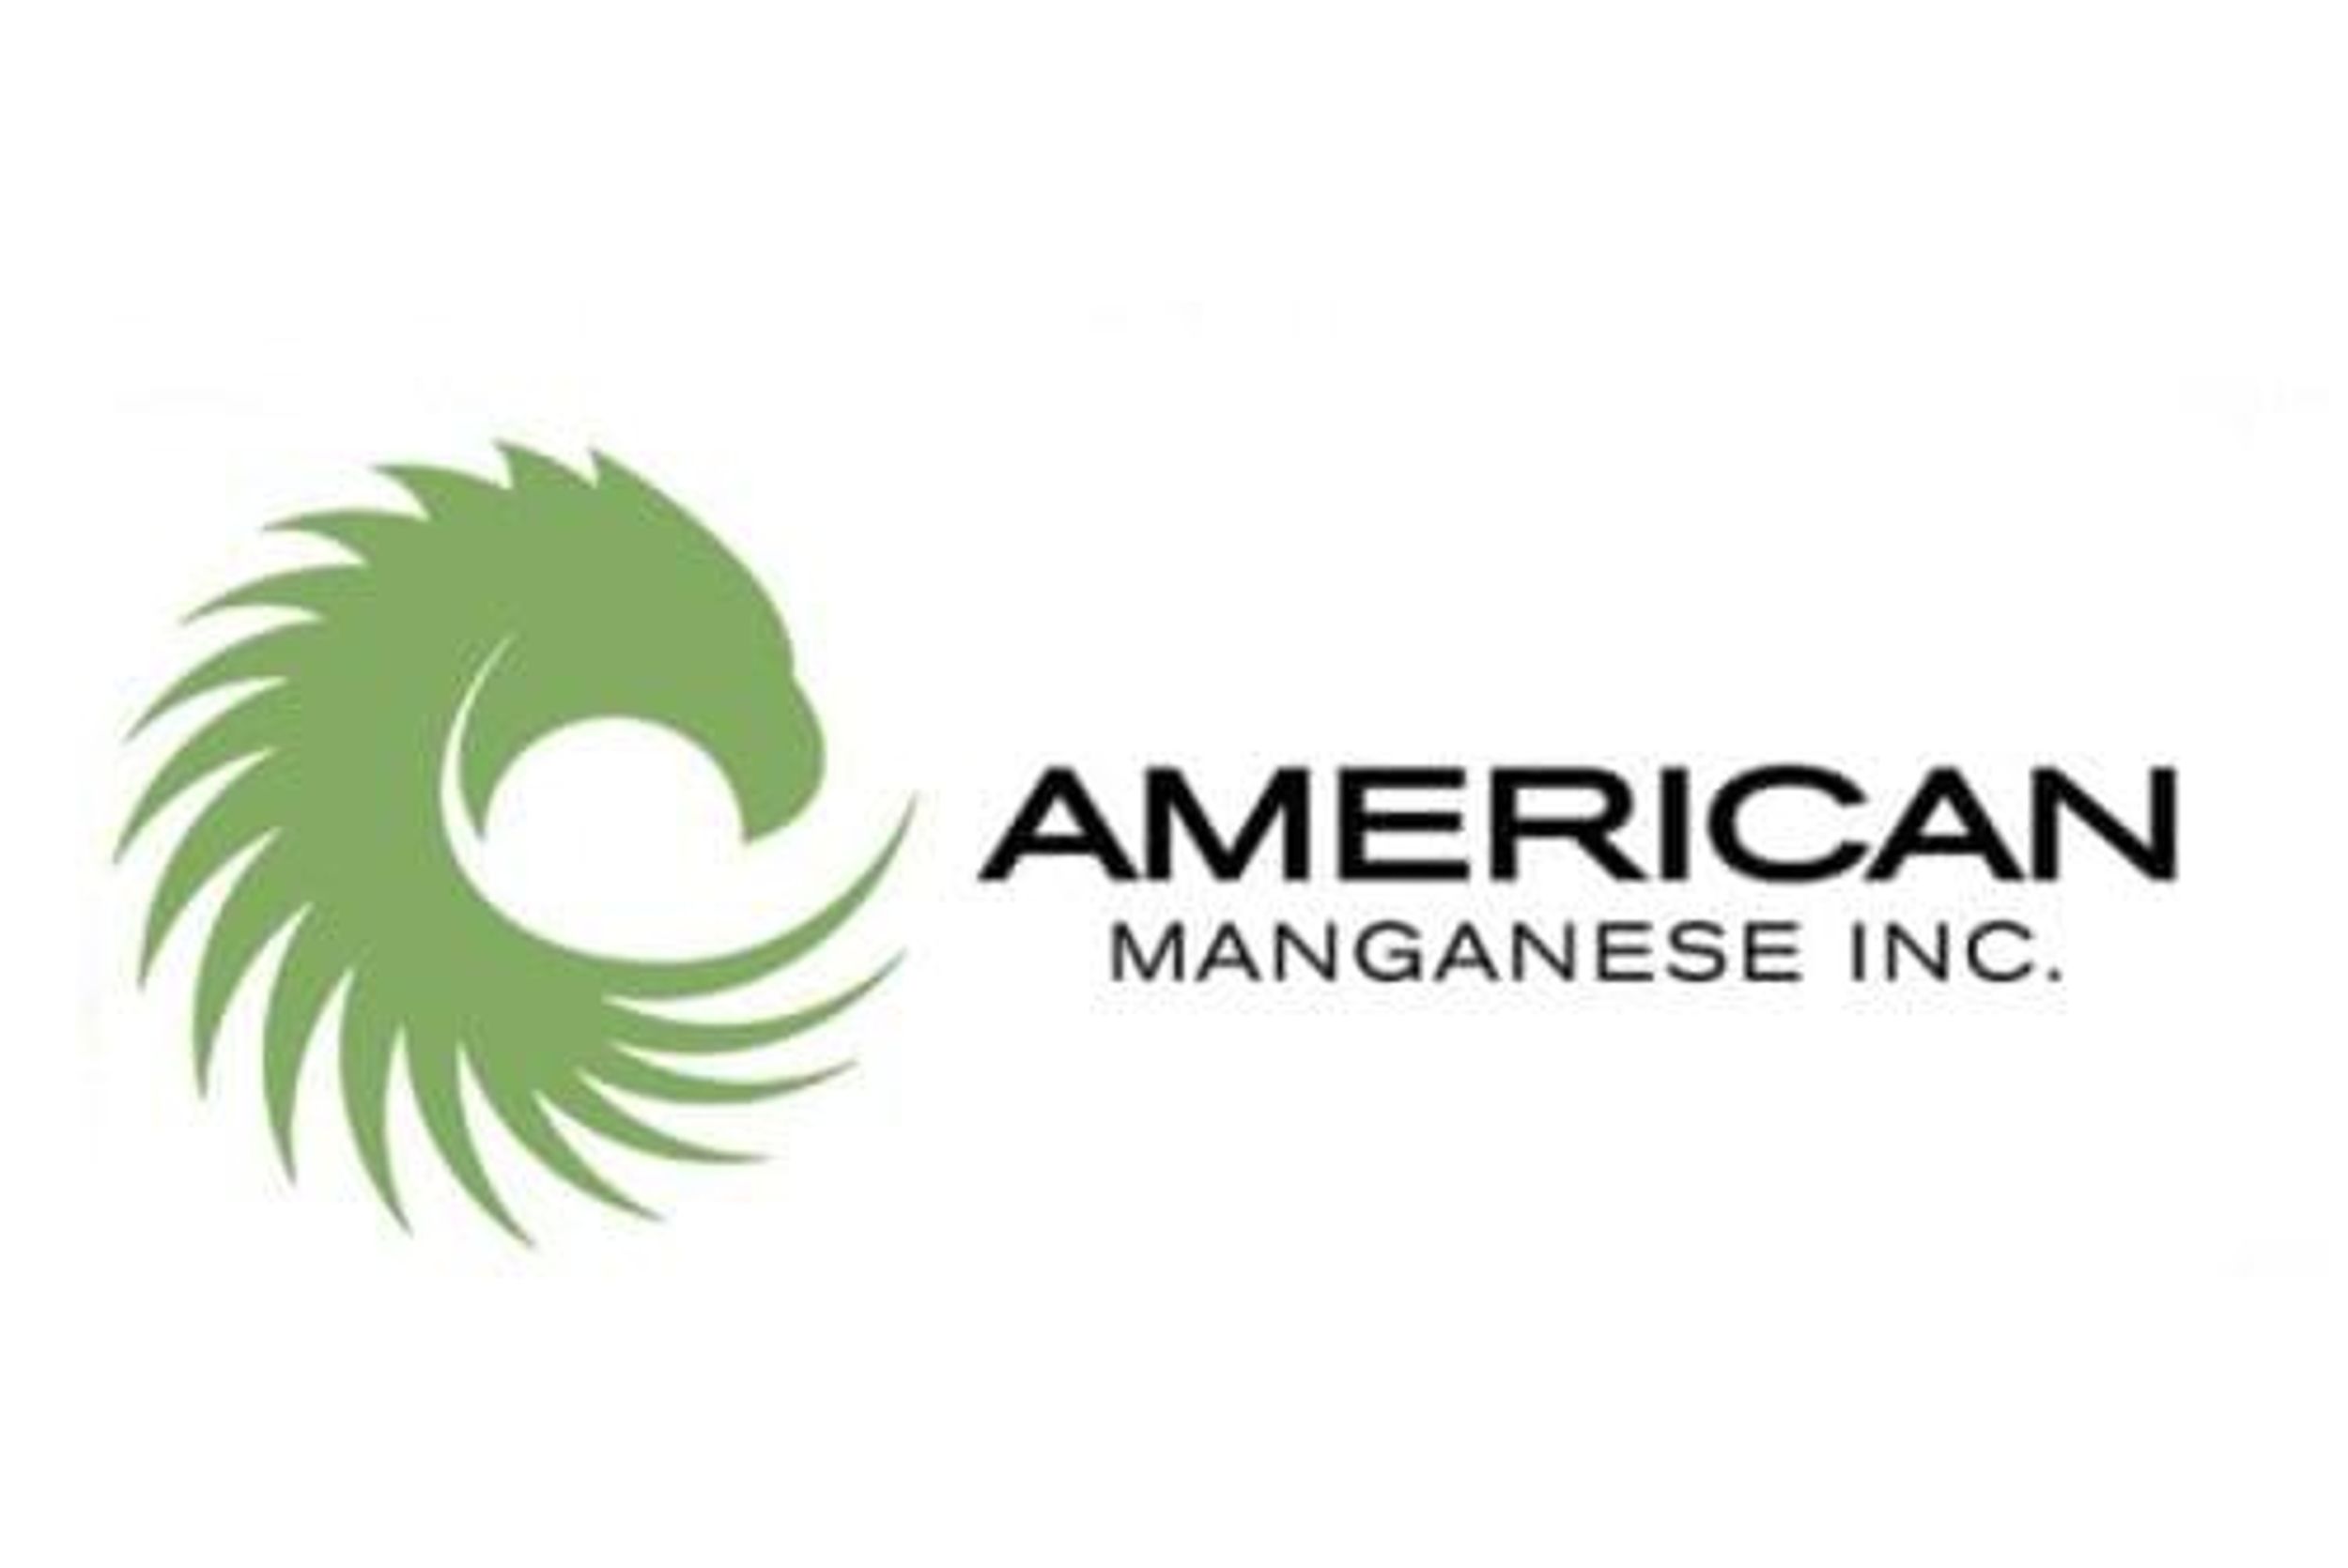 American Manganese's RecycLiCo Demonstration Plant Equipment Ready for Commissioning